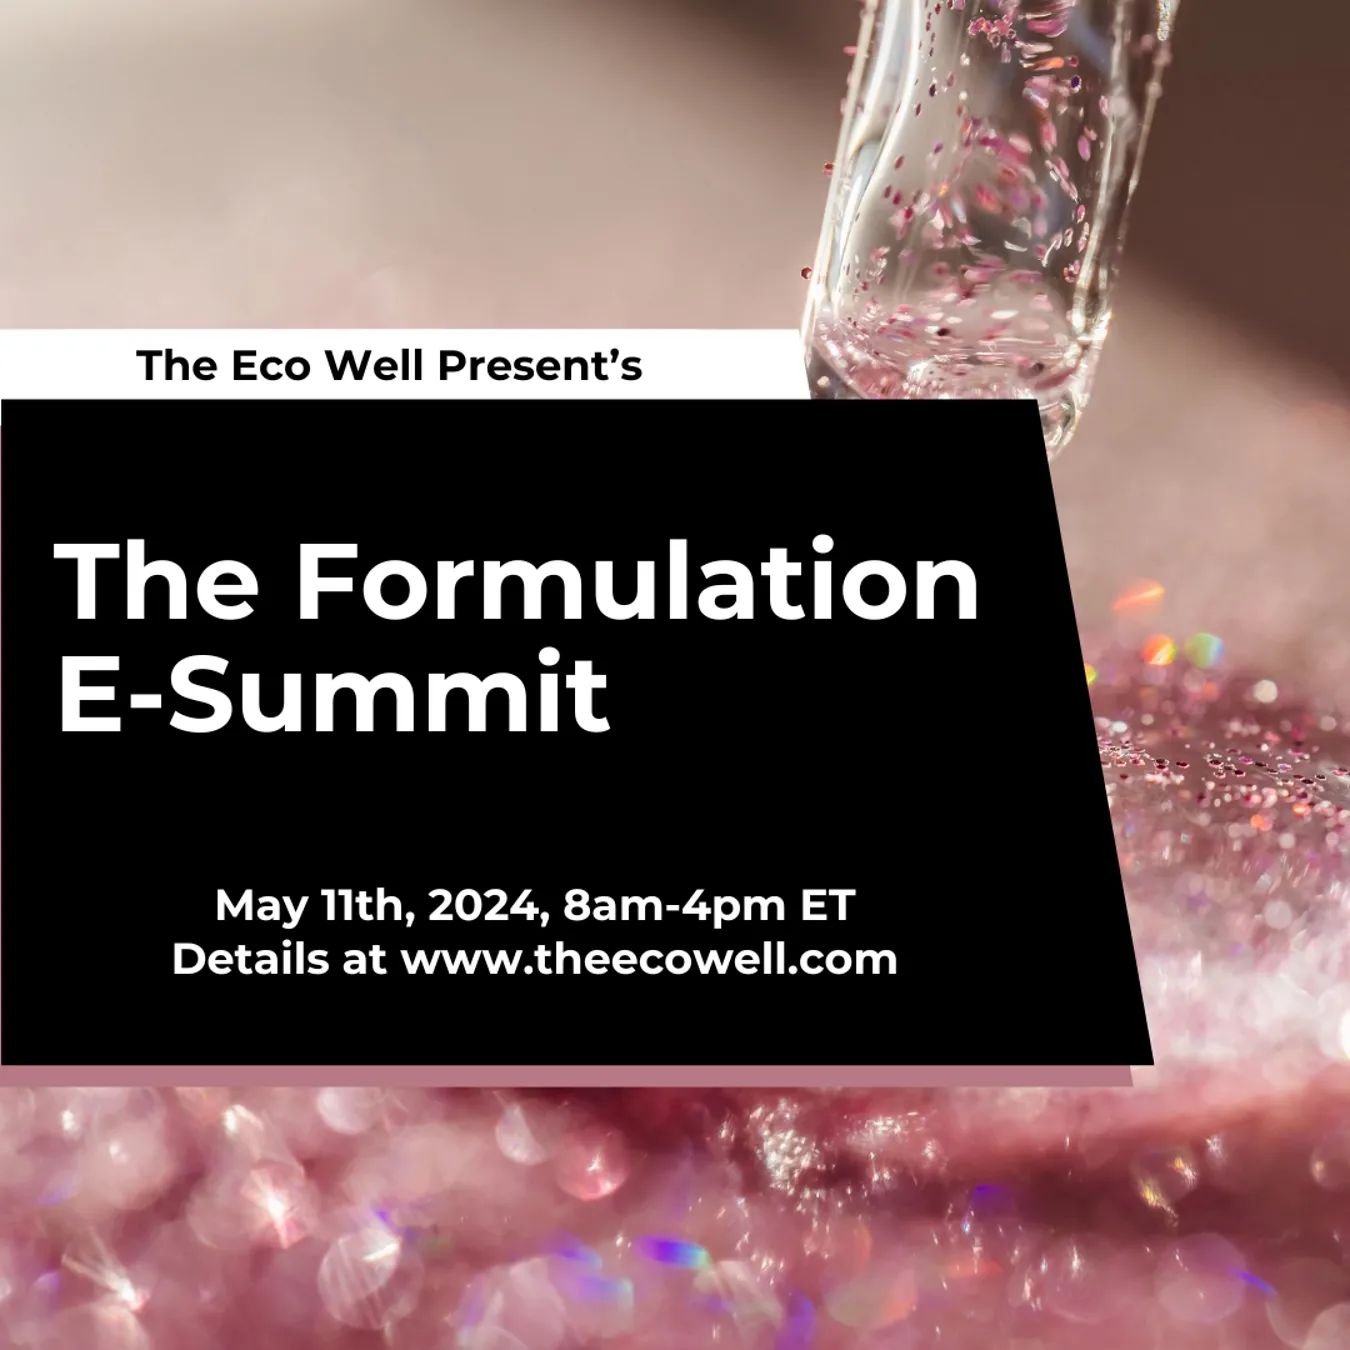 Are you curious to know what developing a new cosmetic product looks like? What are the steps? What questions should you be asking at each stage? How long does the process take?

Then please tune into the upcoming Formulation E-Summit from @theecowel